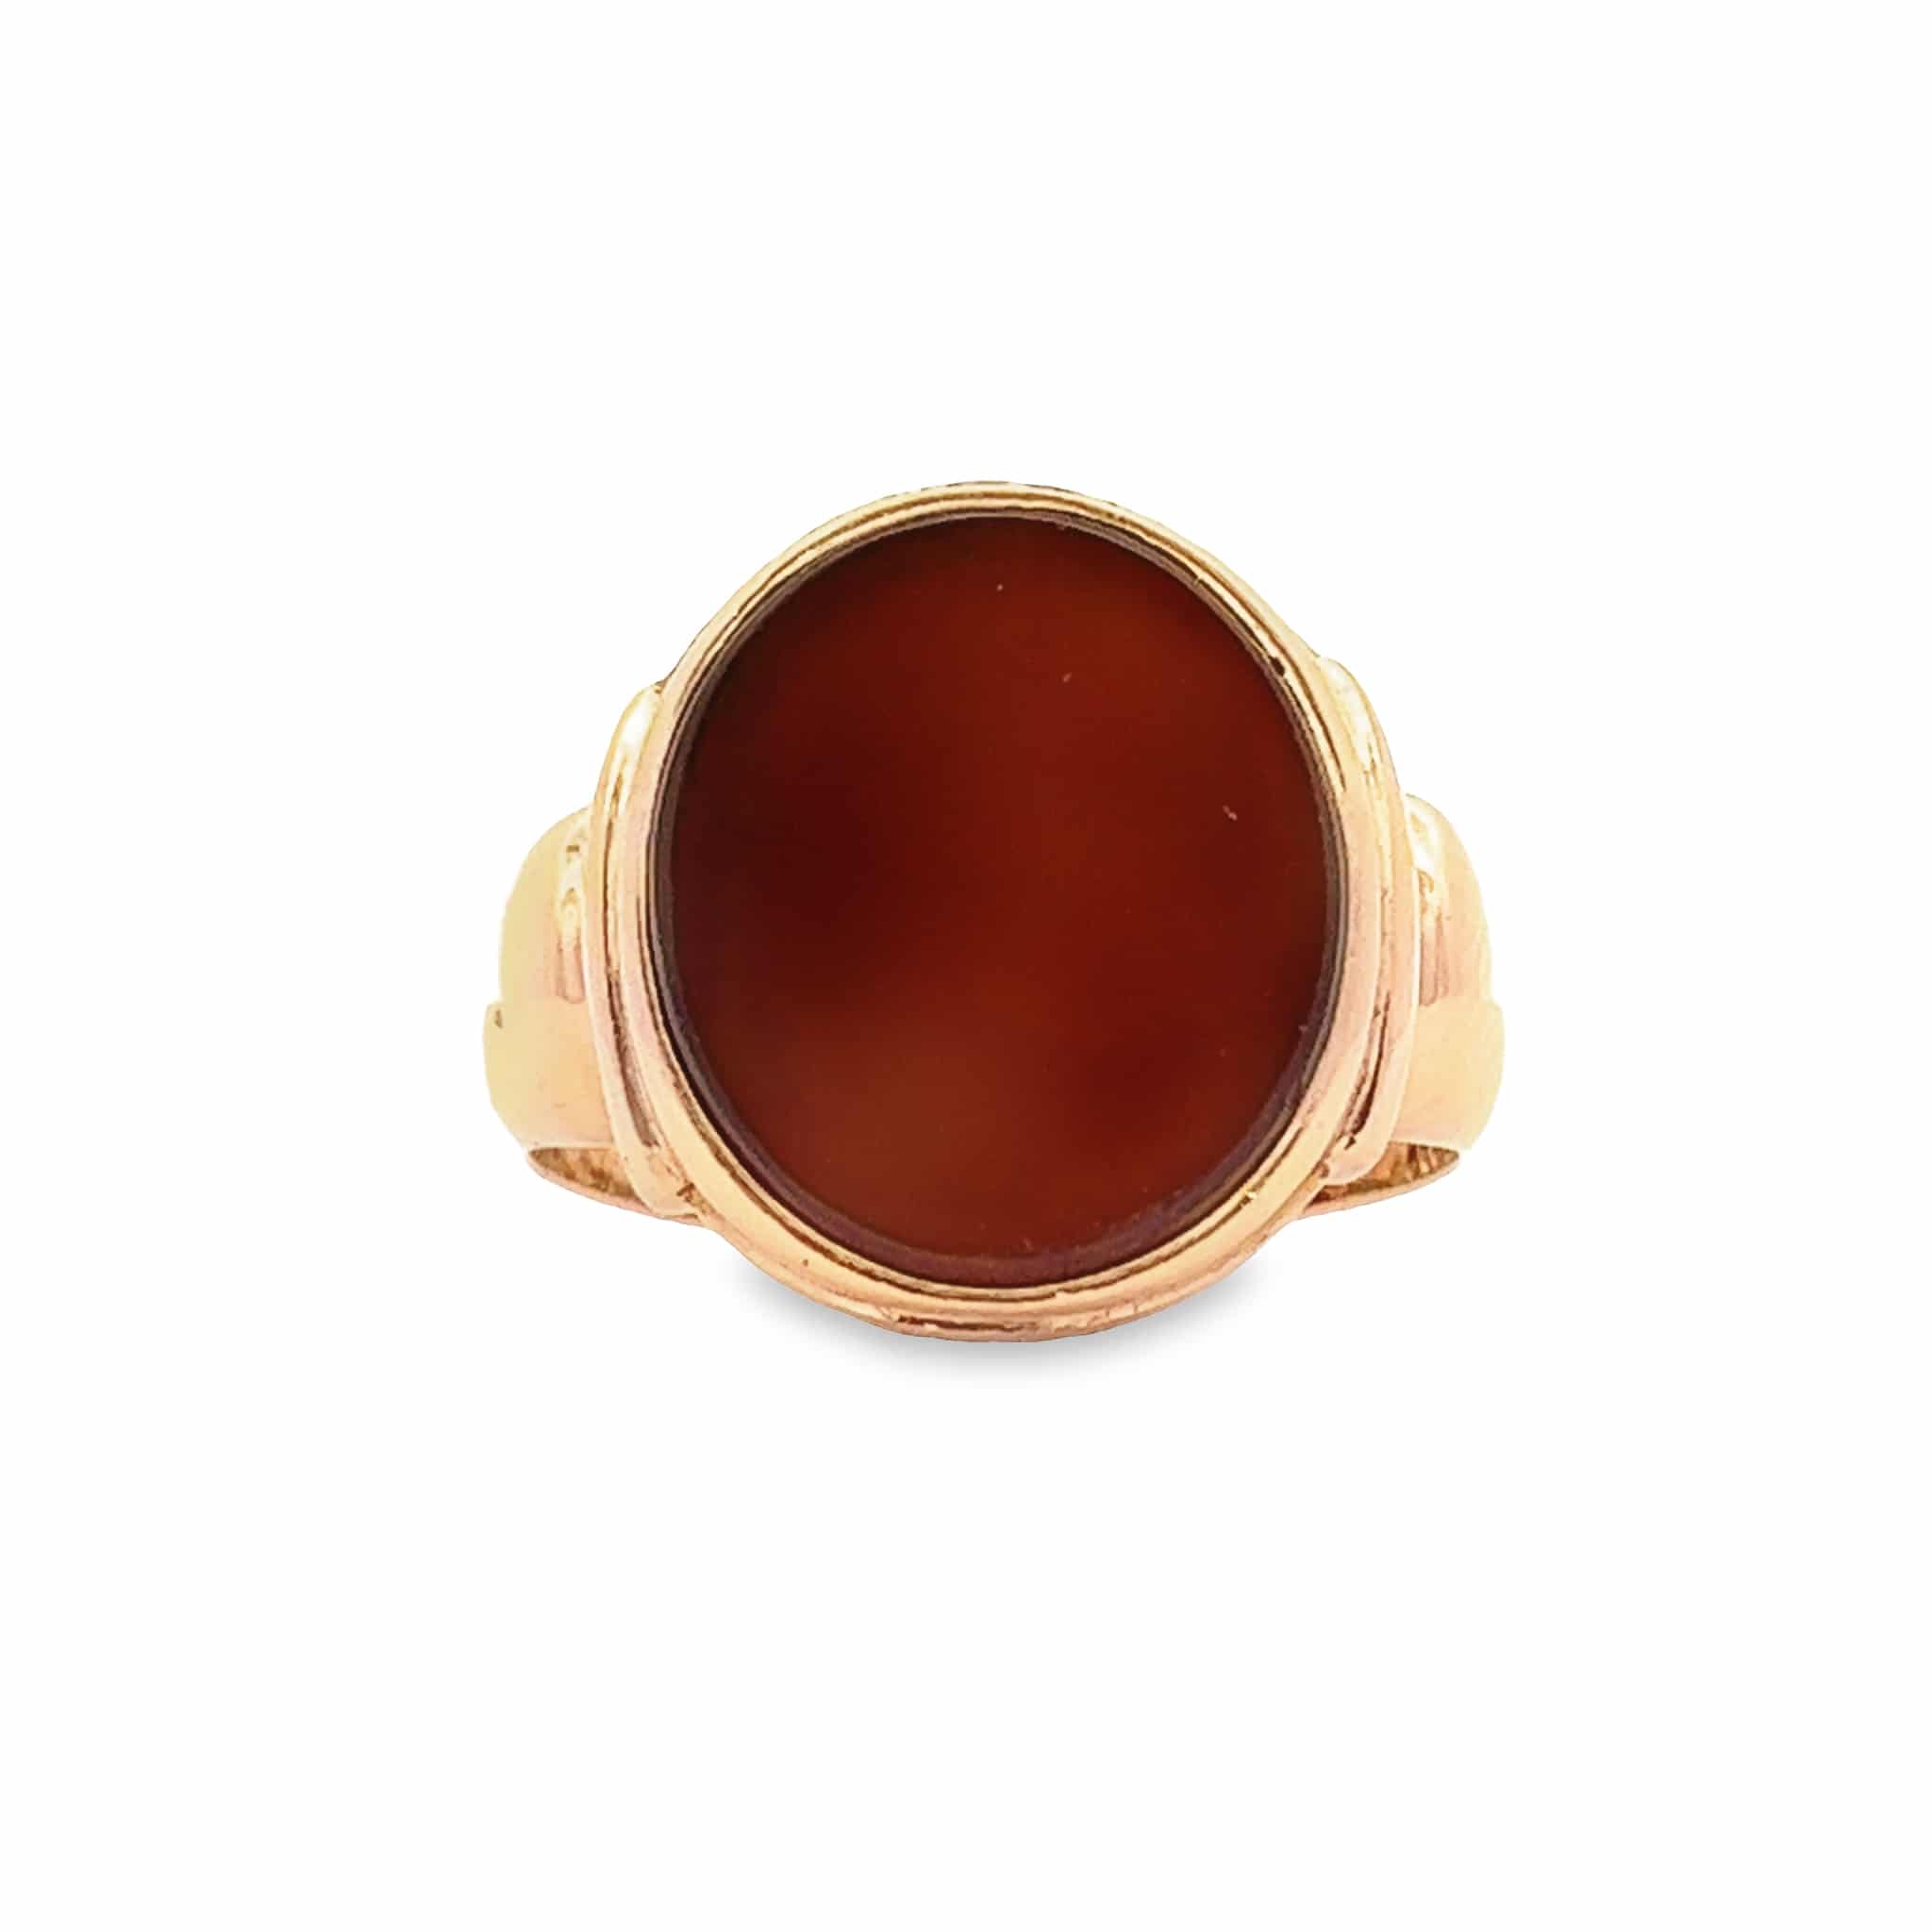 8gm 18ct Gold Gents Signet Ring with Oval Carnelian – Pre-Owned